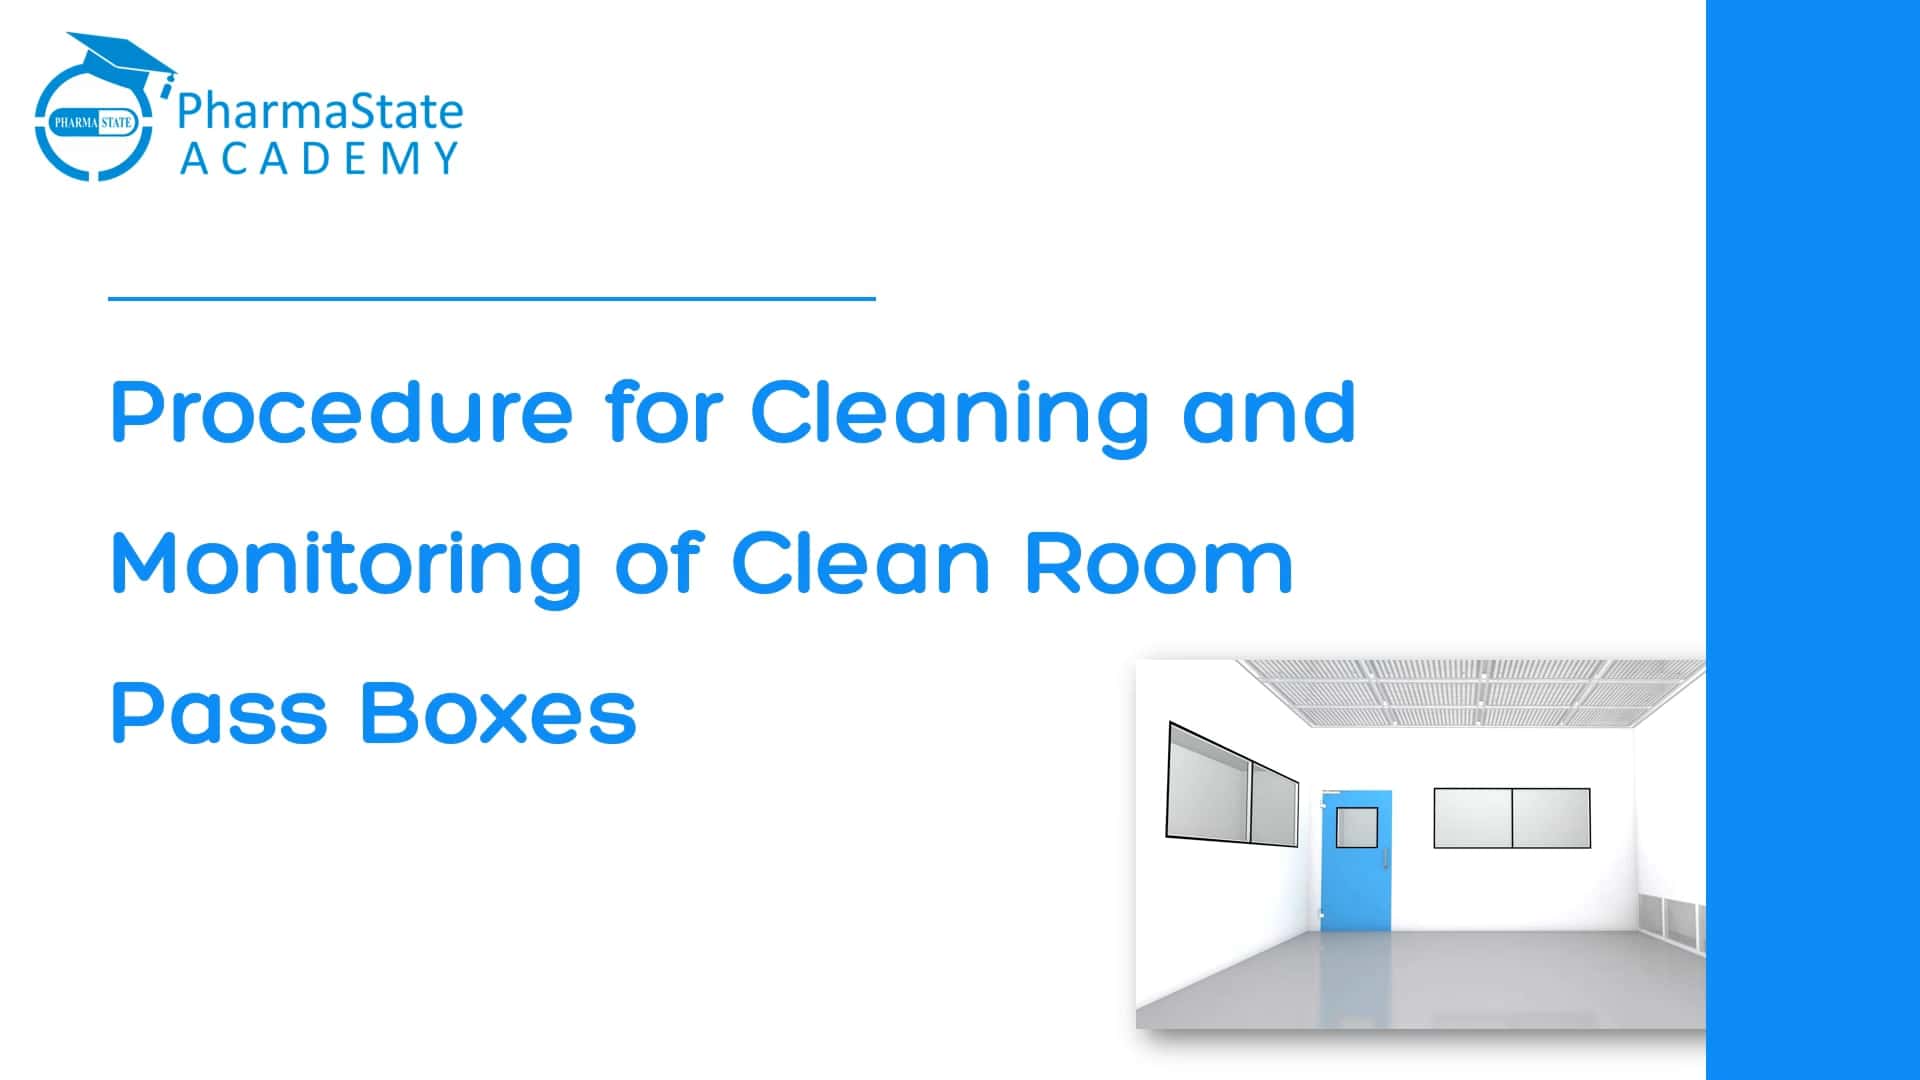 Procedure for Cleaning and Monitoring of Clean Room Pass Boxes